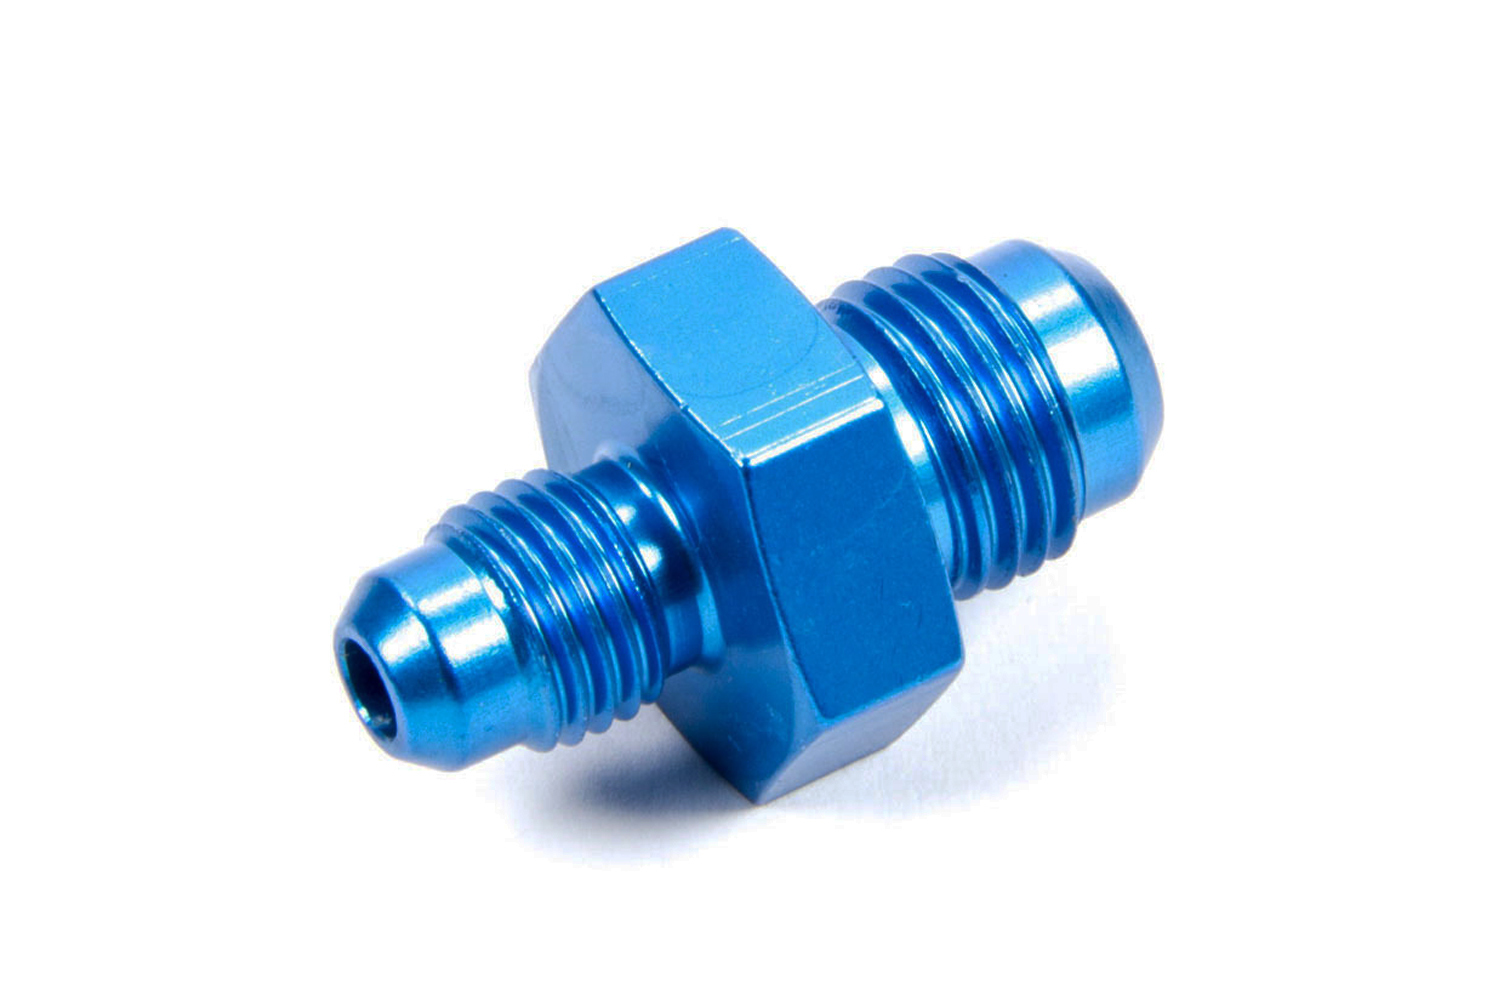 Fragola 491908 - Fitting, Adapter, Straight, 8 AN Male to 4 AN Male, Aluminum, Blue Anodized, Each